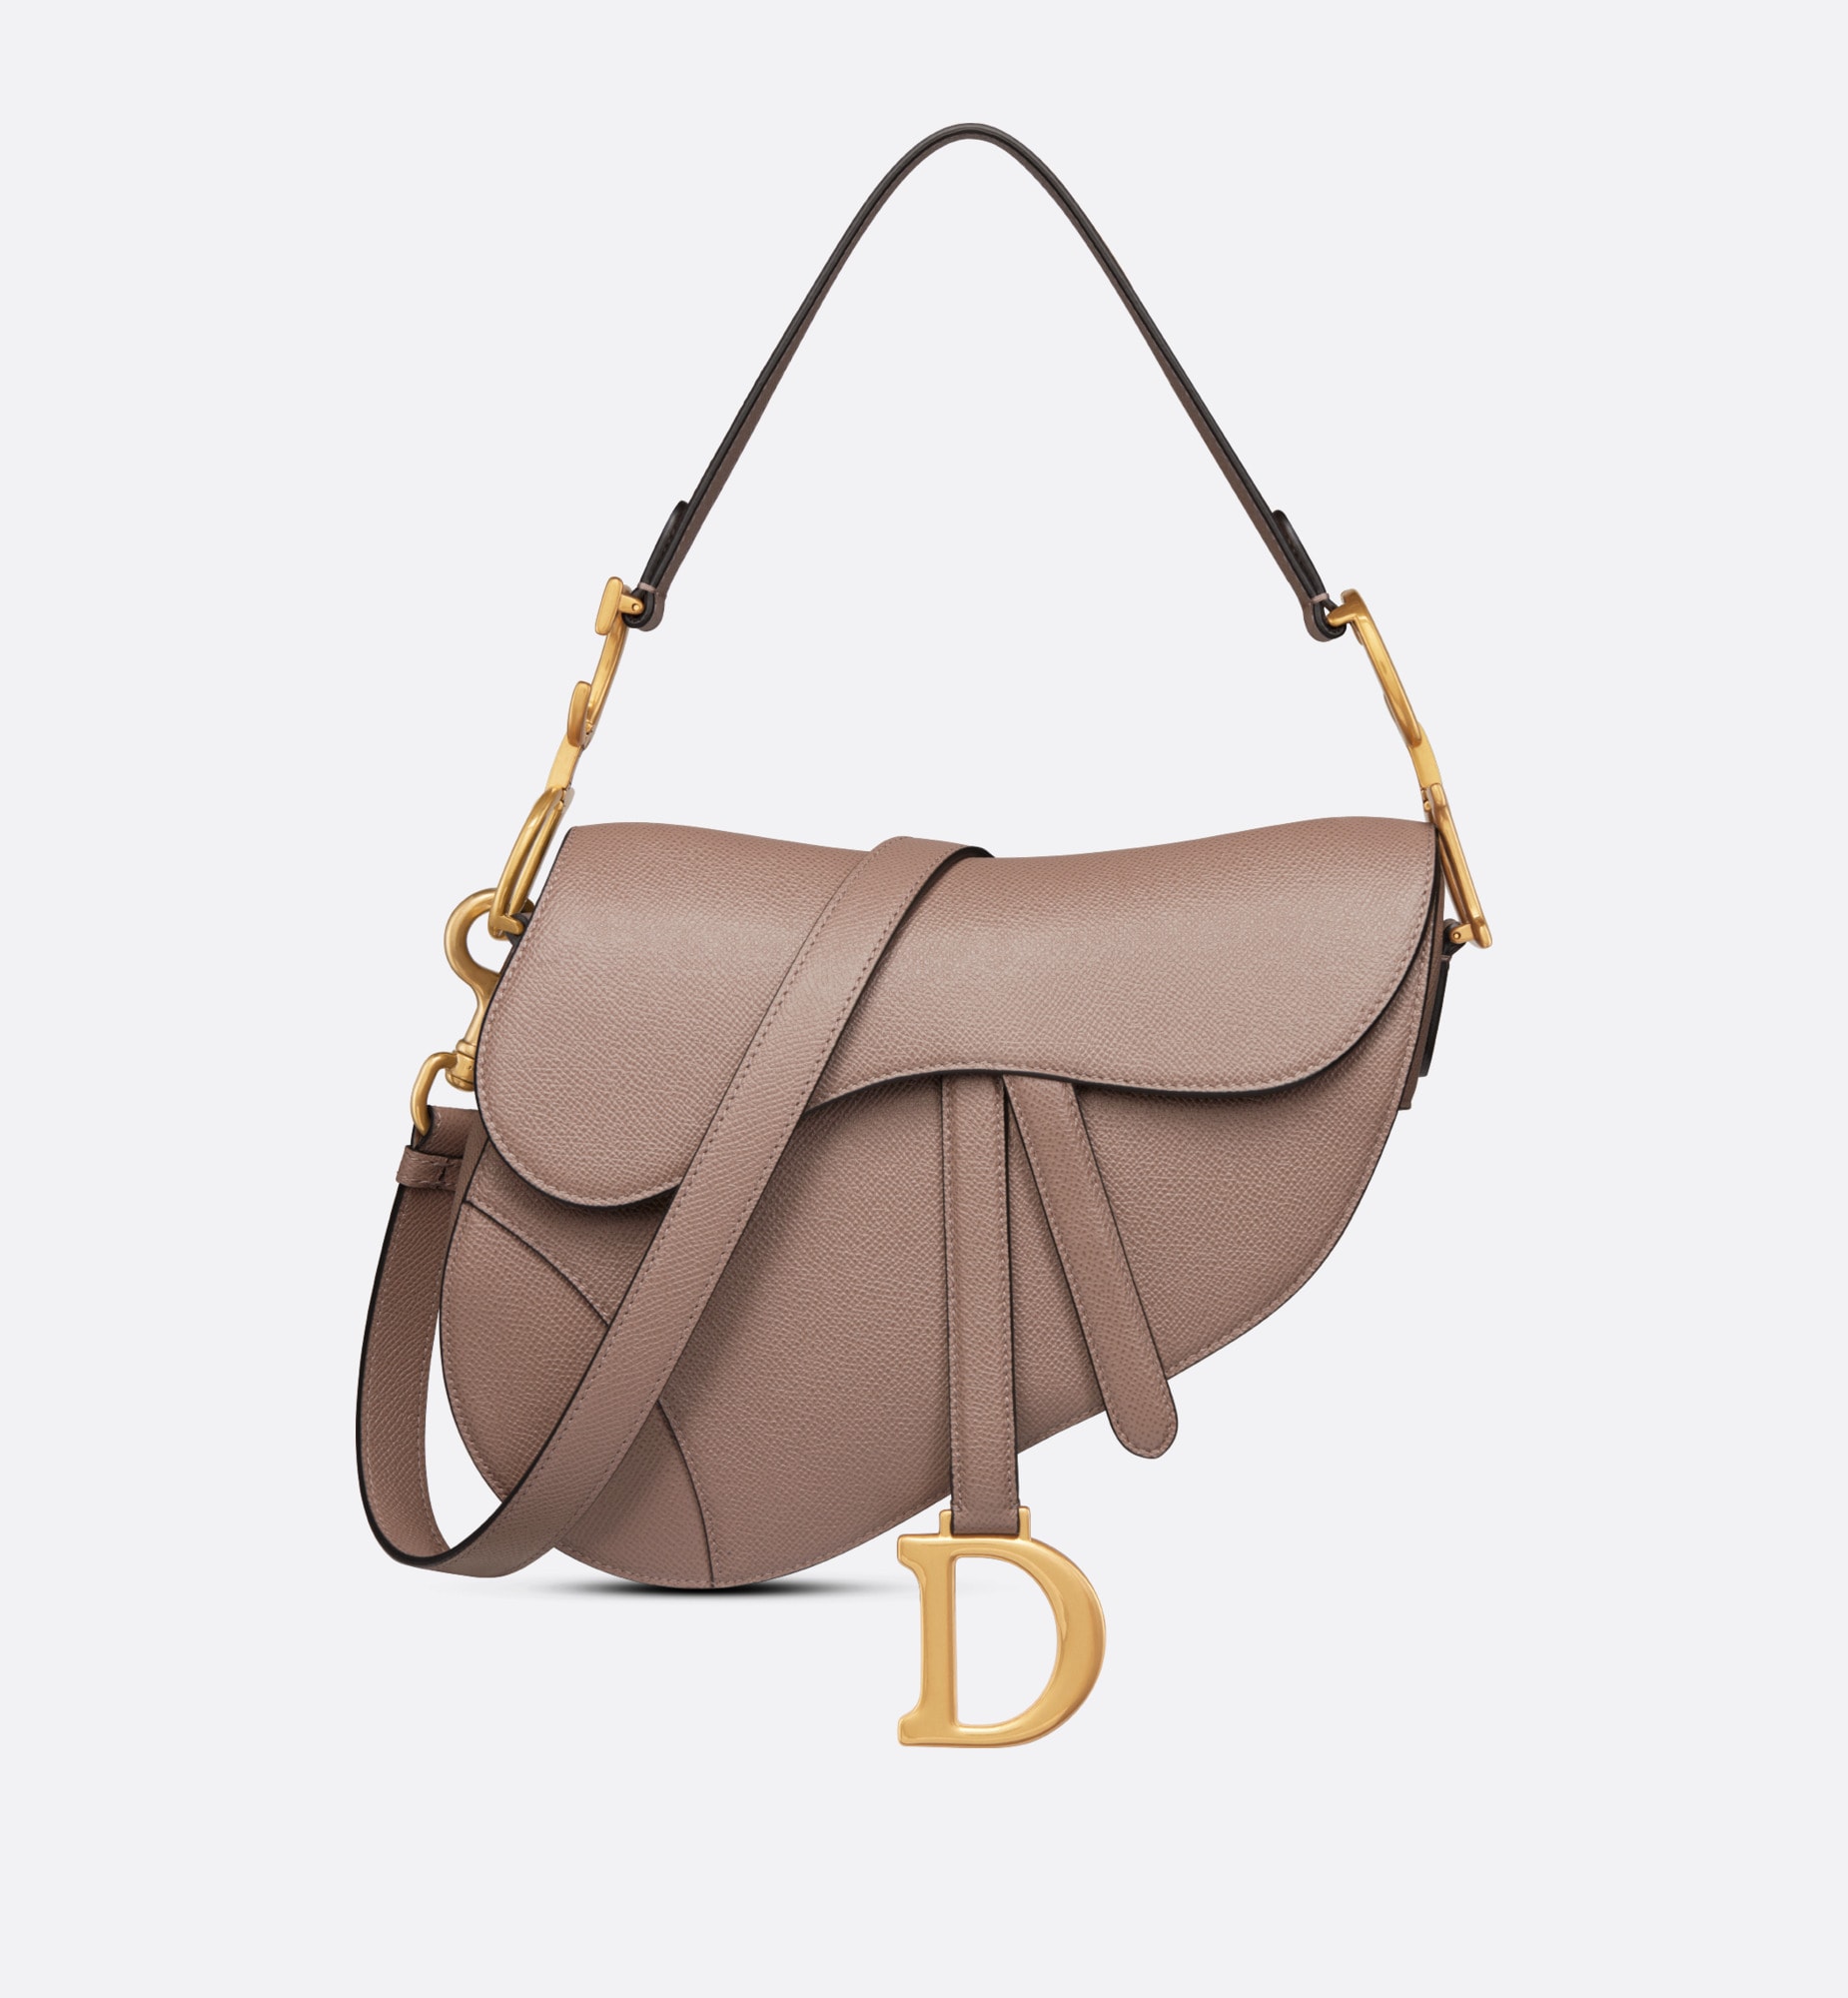 Dior saddle bag with strap warm taupe grained calfskin